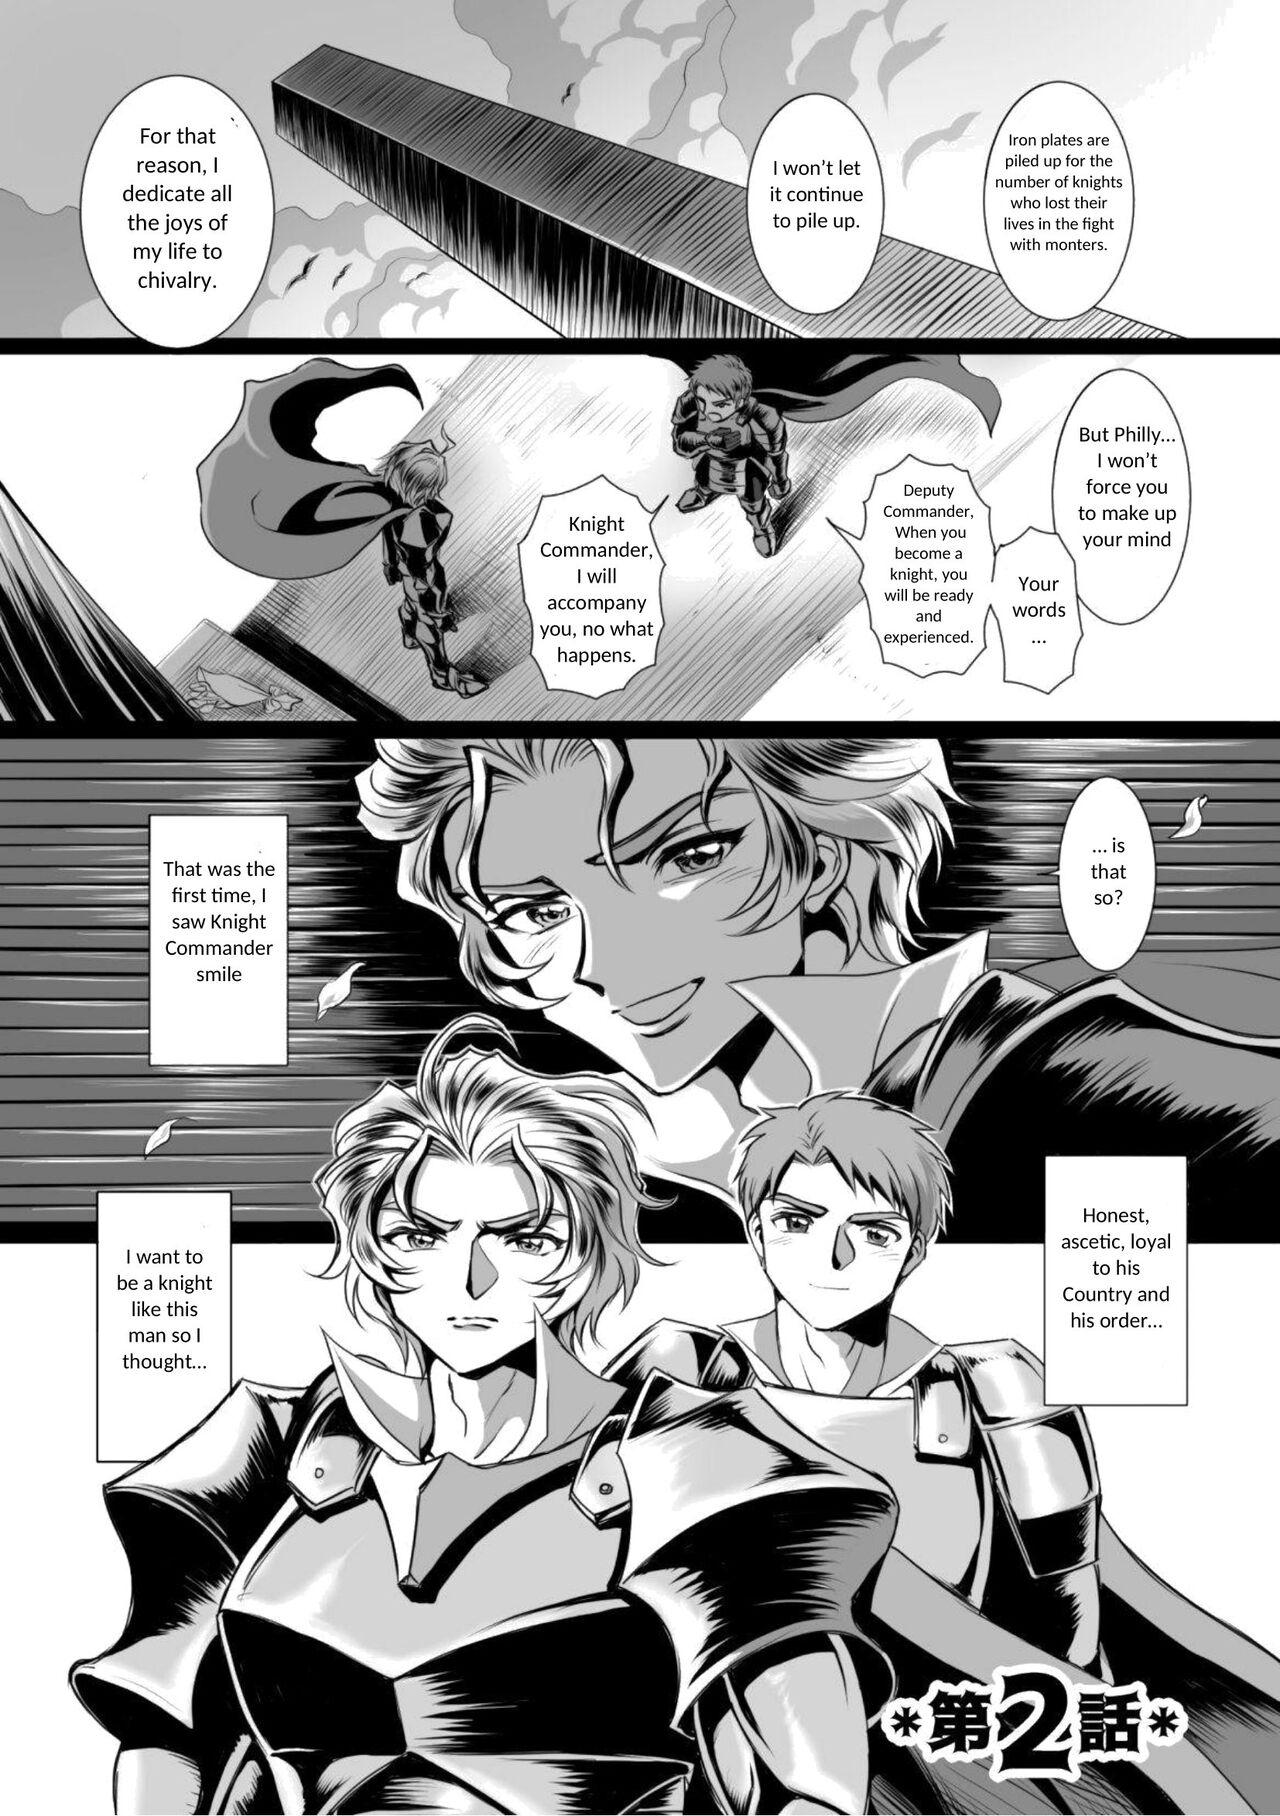 Fantasy Massage [Usuno Taro] Possessed Knight Stallion-Taken Over By Disgusting Man Raped and Climaxes Unsightly Ch.2 - English Matures - Page 3